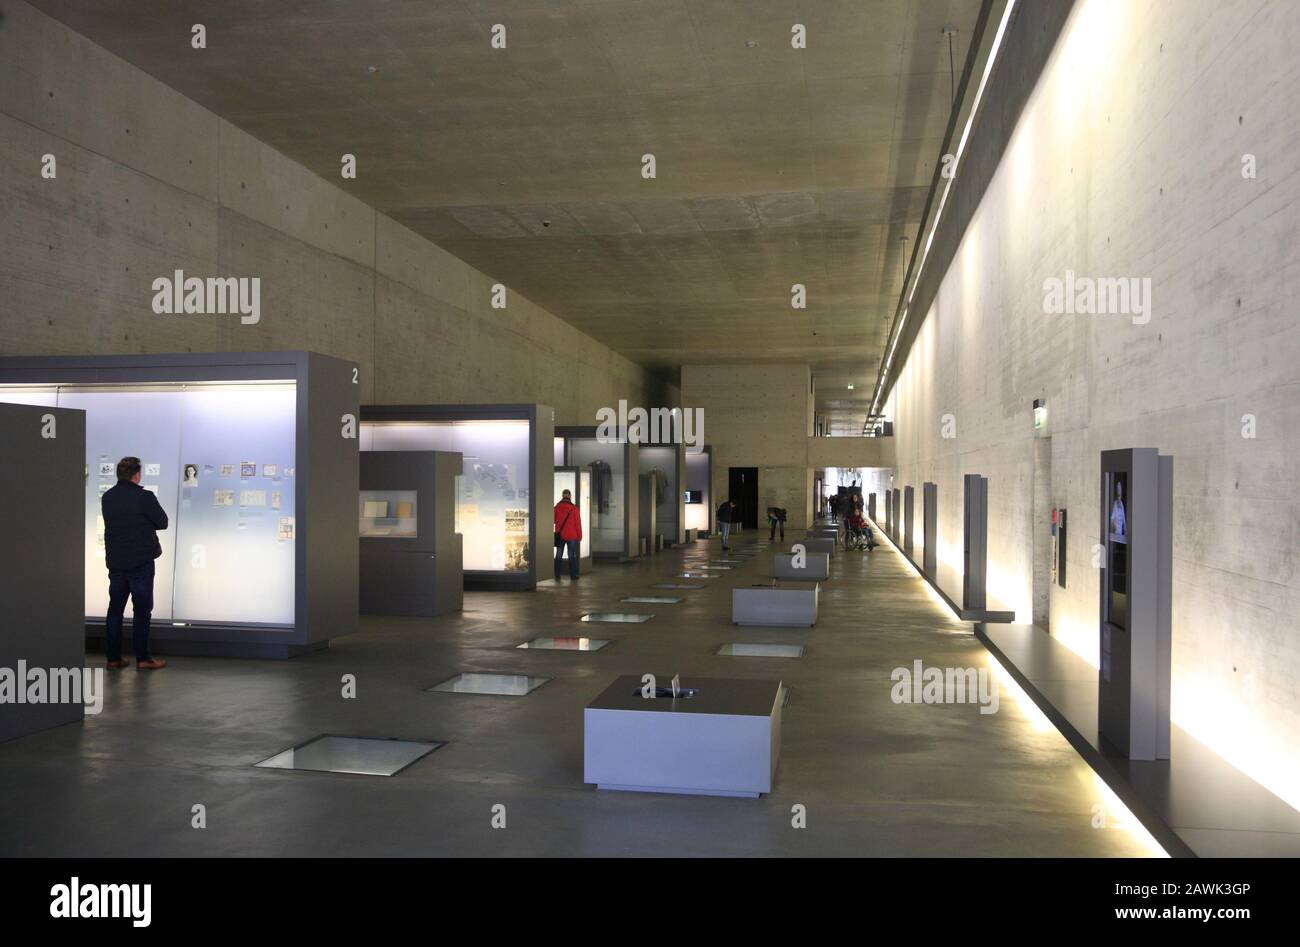 Exhibition hall, Bergen-Belsen concentration camp memorial, Lower Saxony, Germany, Europe Stock Photo